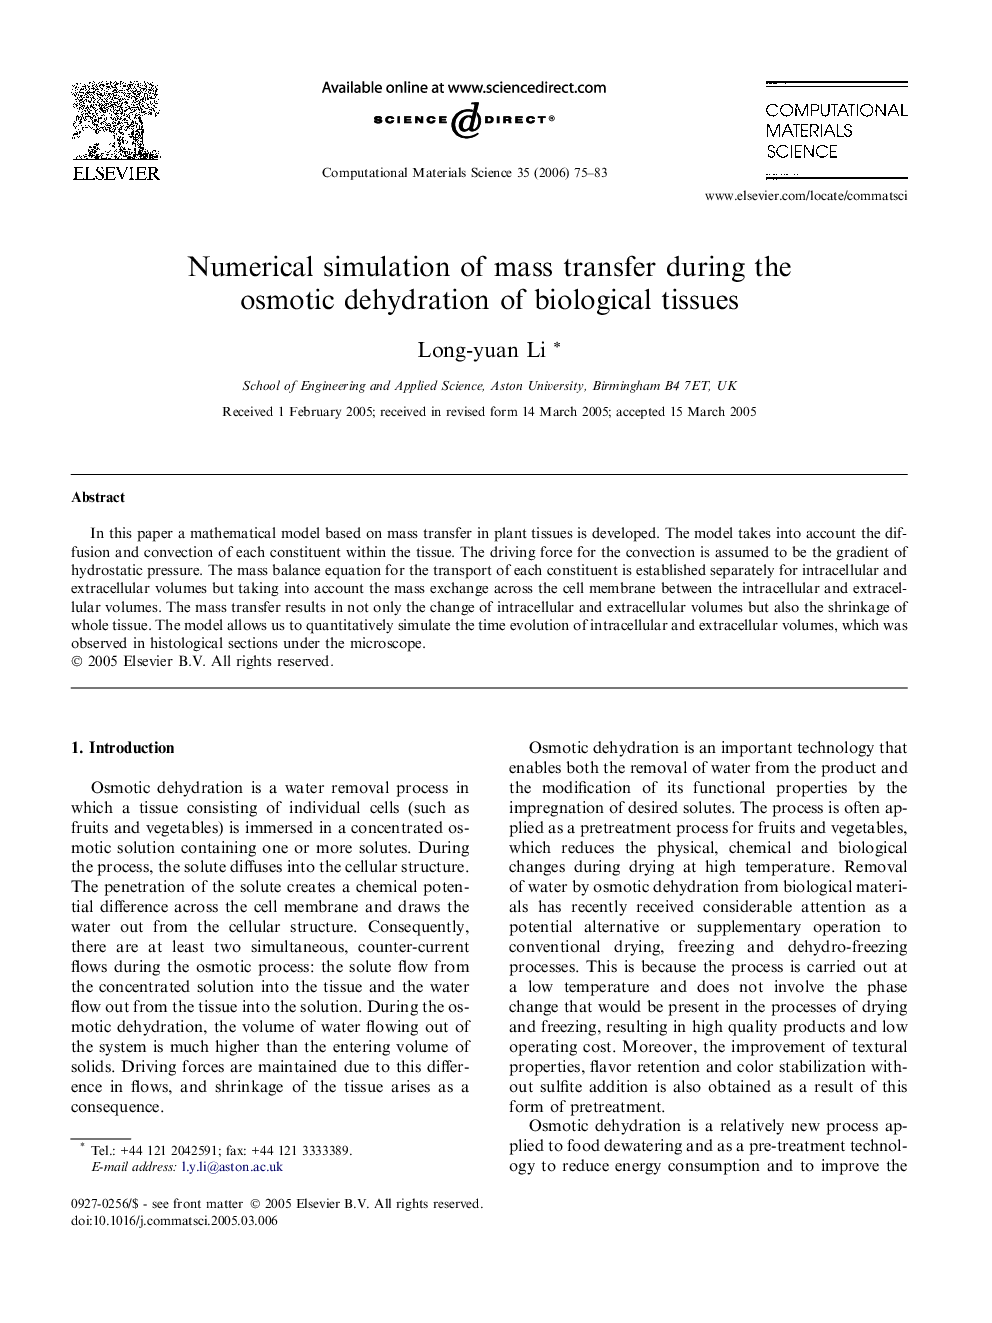 Numerical simulation of mass transfer during the osmotic dehydration of biological tissues